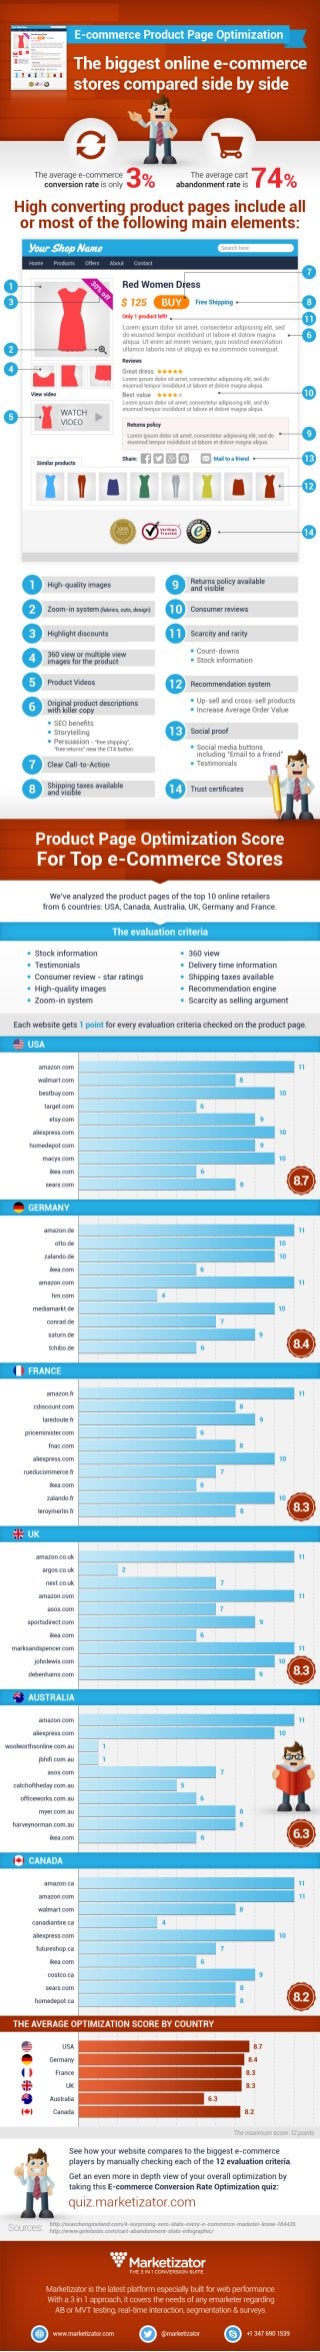 Product Page Optimization - The biggest online stores compared side by side [Infographic]